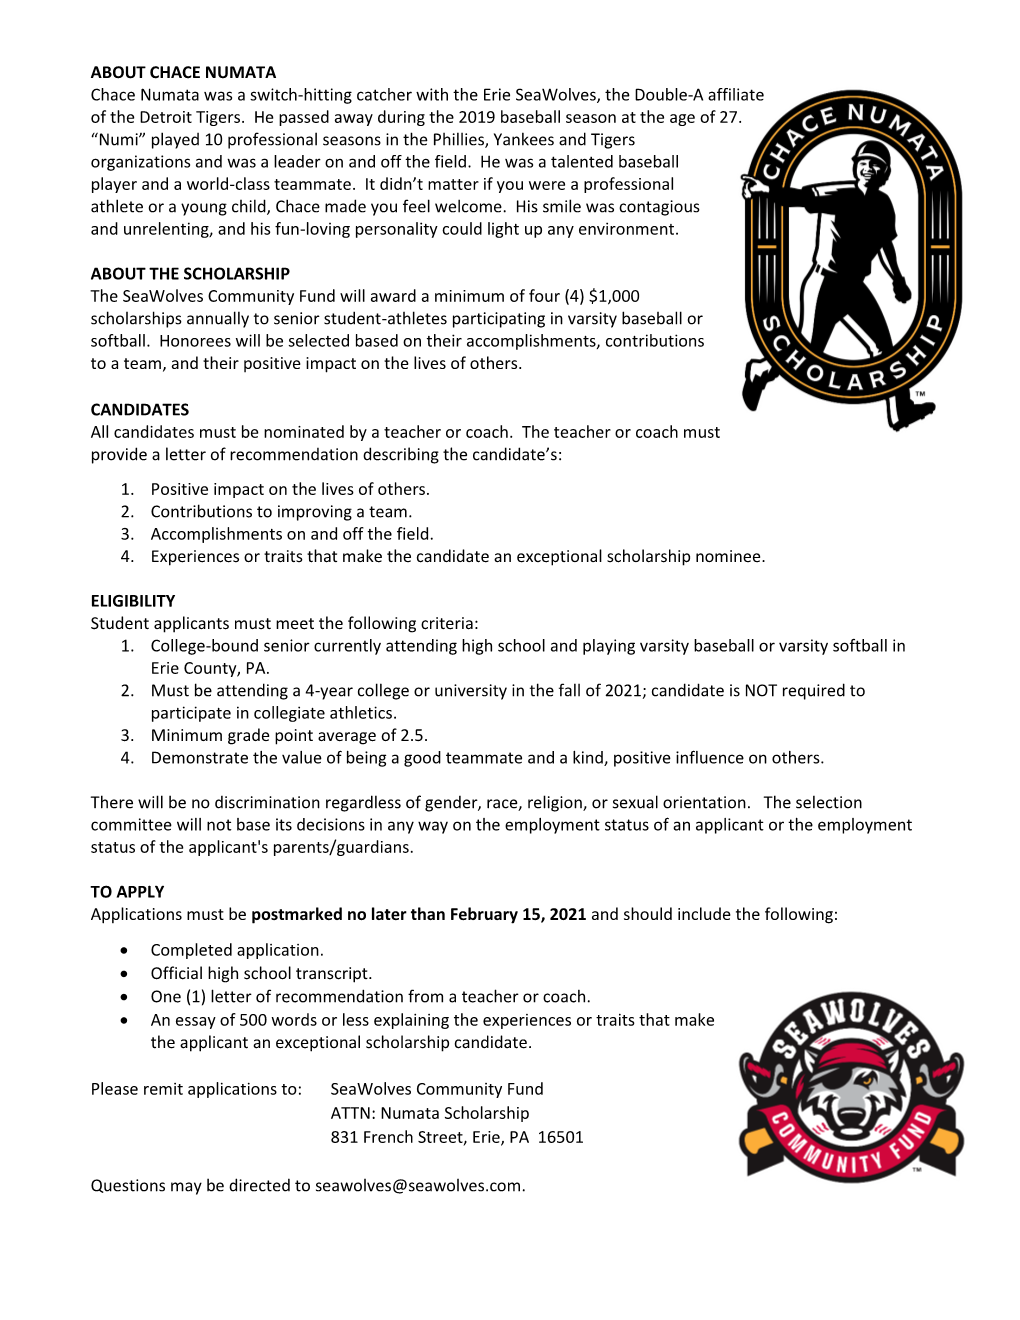 Chace Numata Scholarship Application Requirements